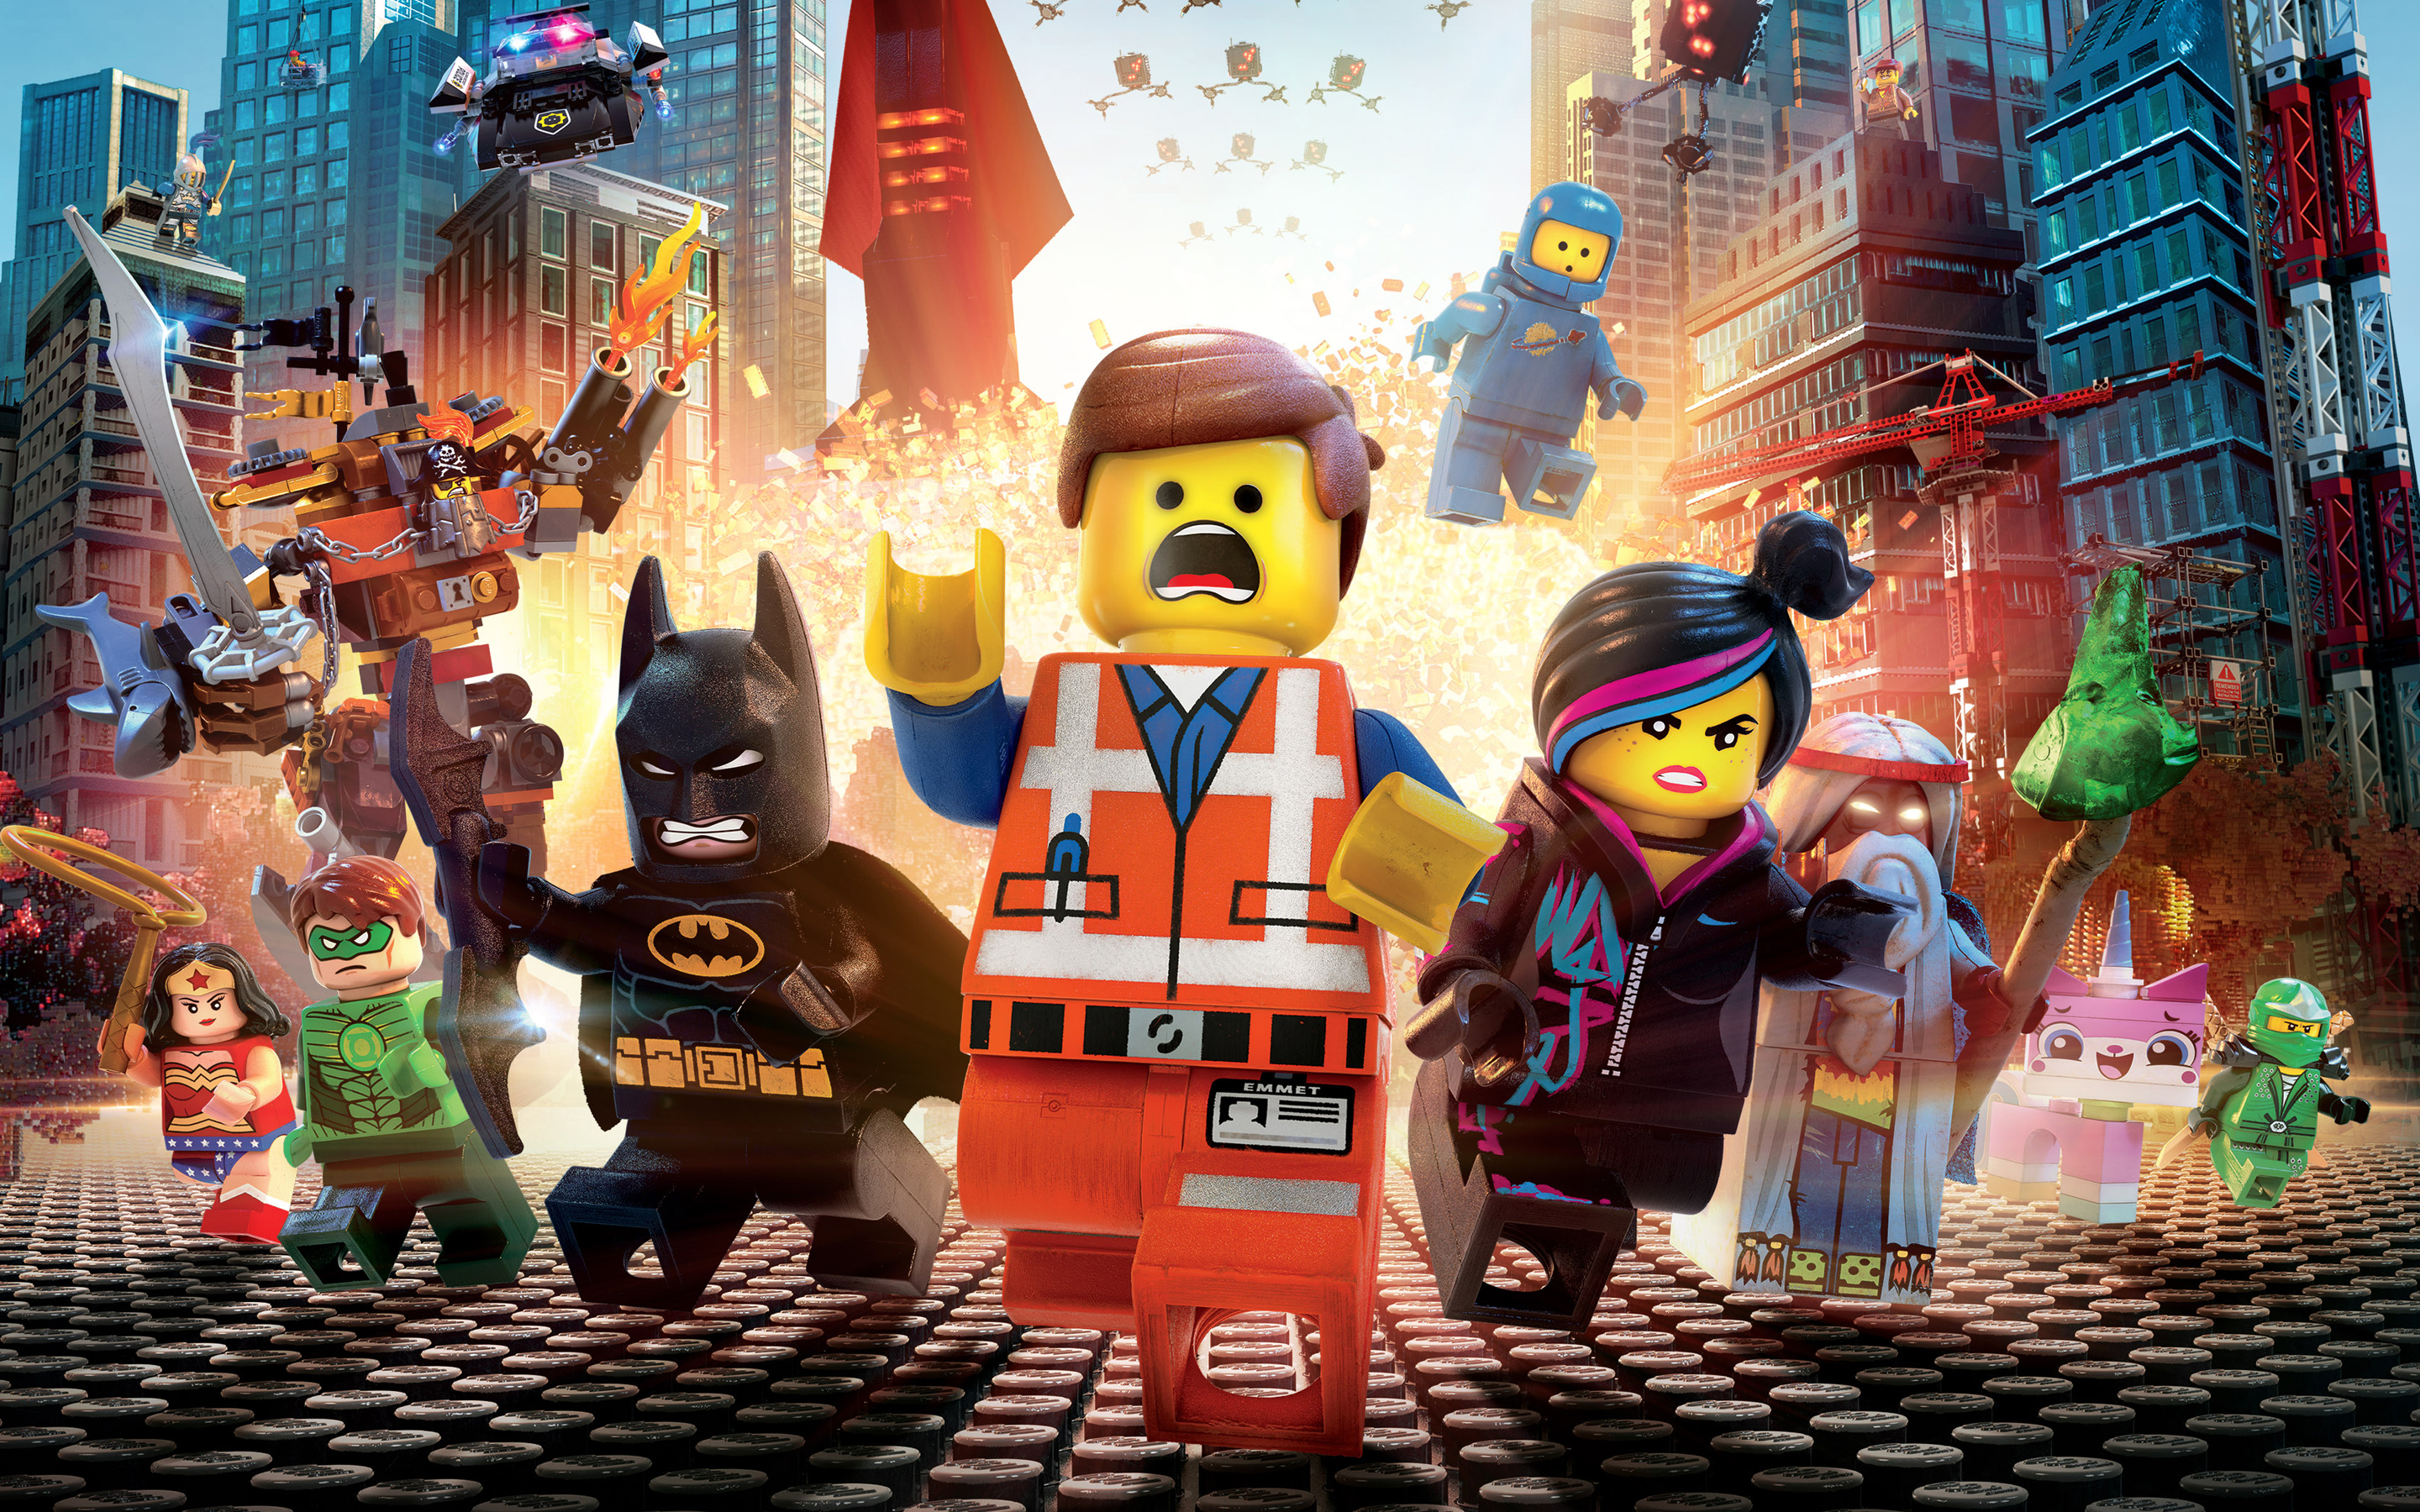 Watch the Entire Lego Movie for Free on YouTube - FBTB